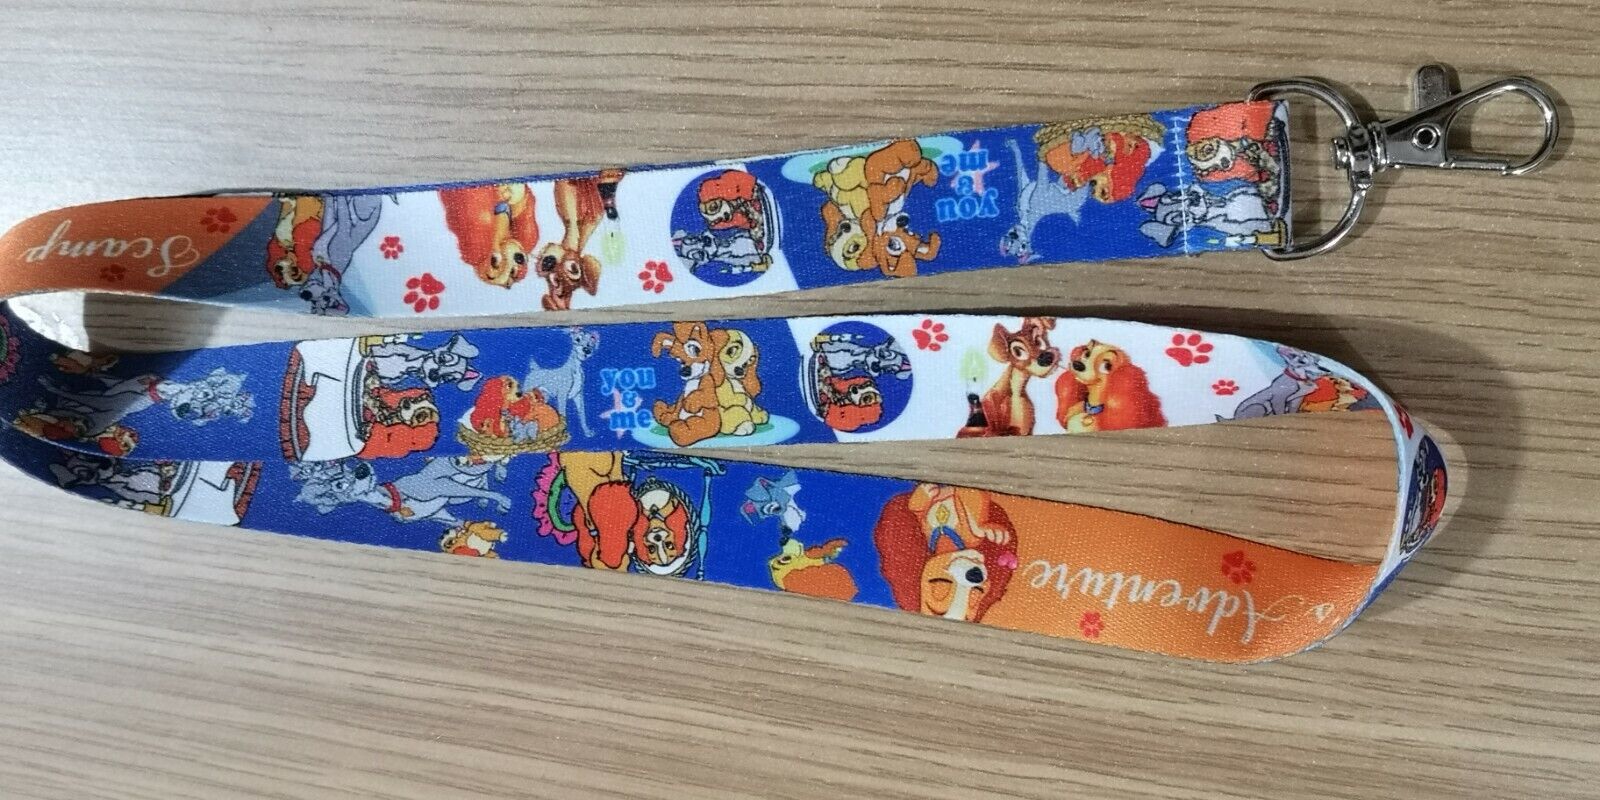 10pcs cartoon Dog Lanyard For Fixed price for sale Bus subway ID Limited price Holder KeyChain Card